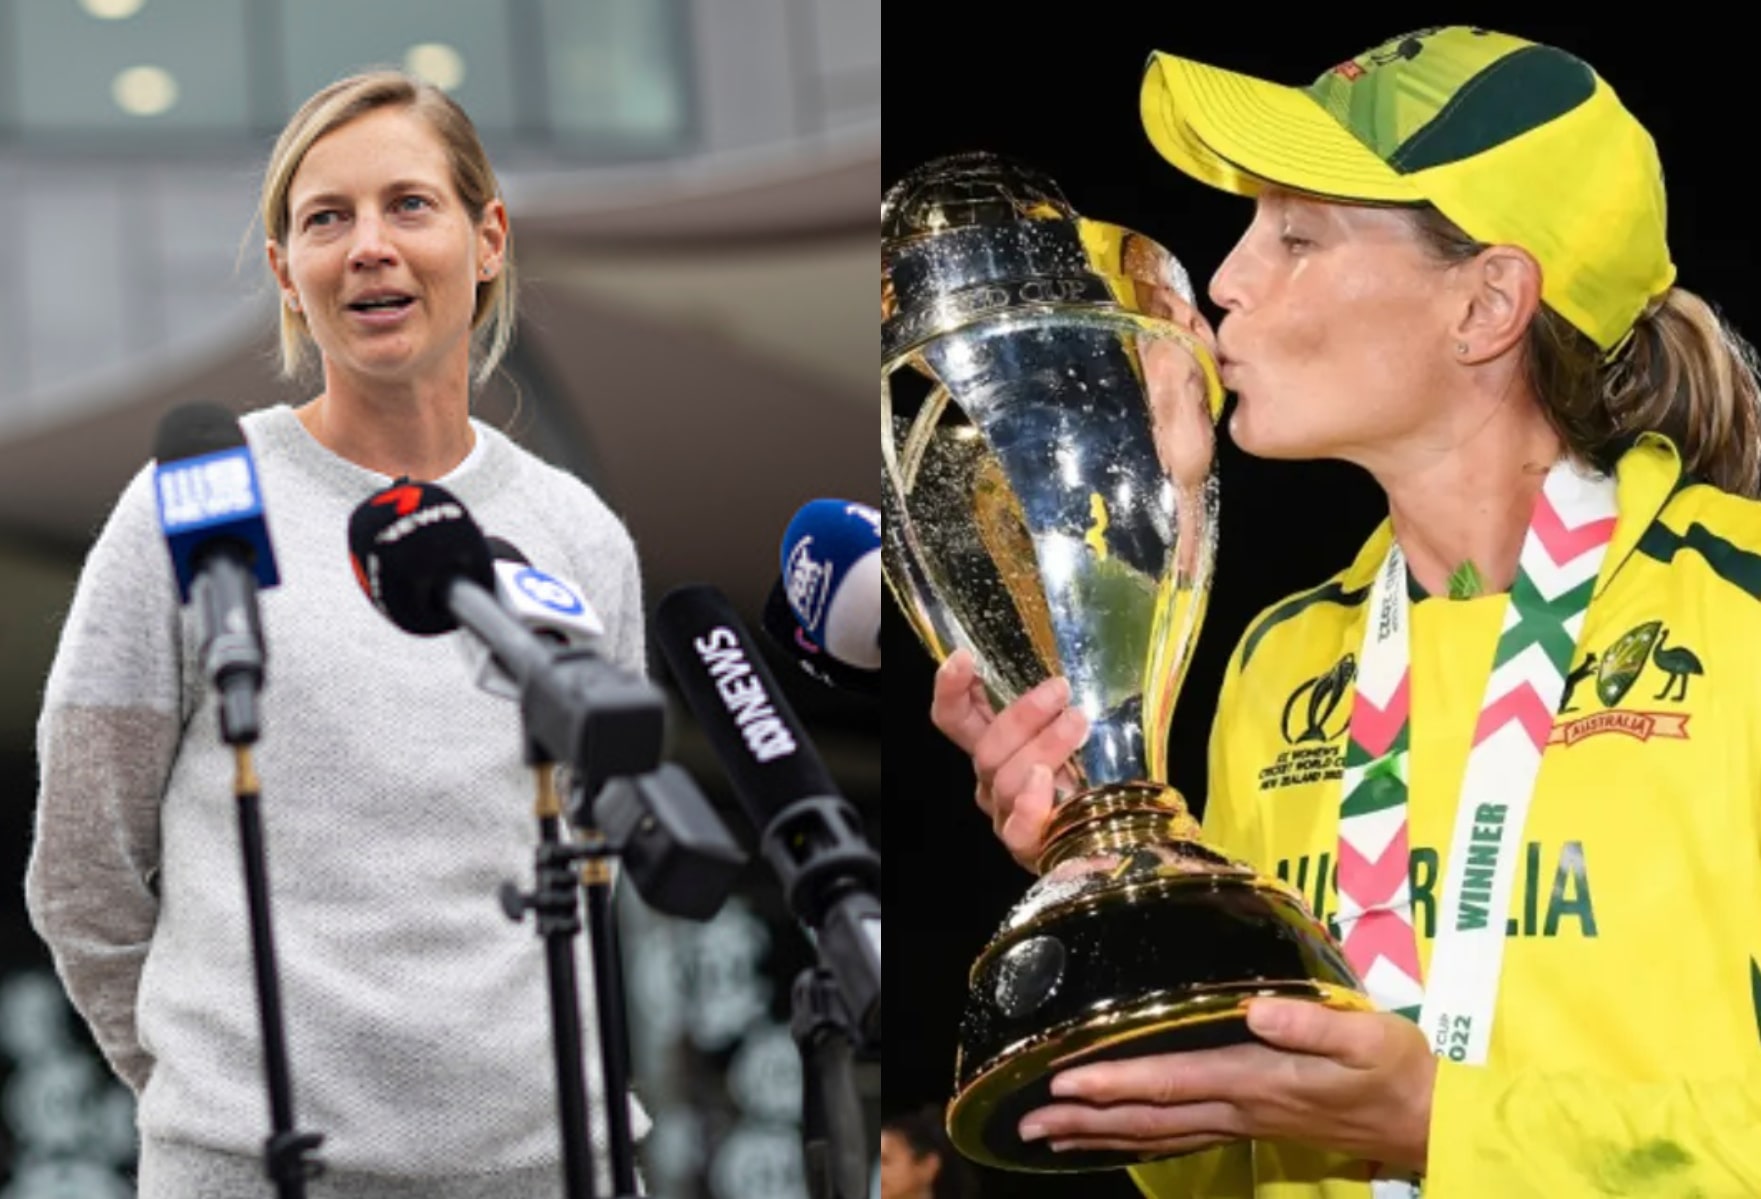 Meg Lanning won 2 ODI World Cups and 5 T20 World Cups as captain | Getty